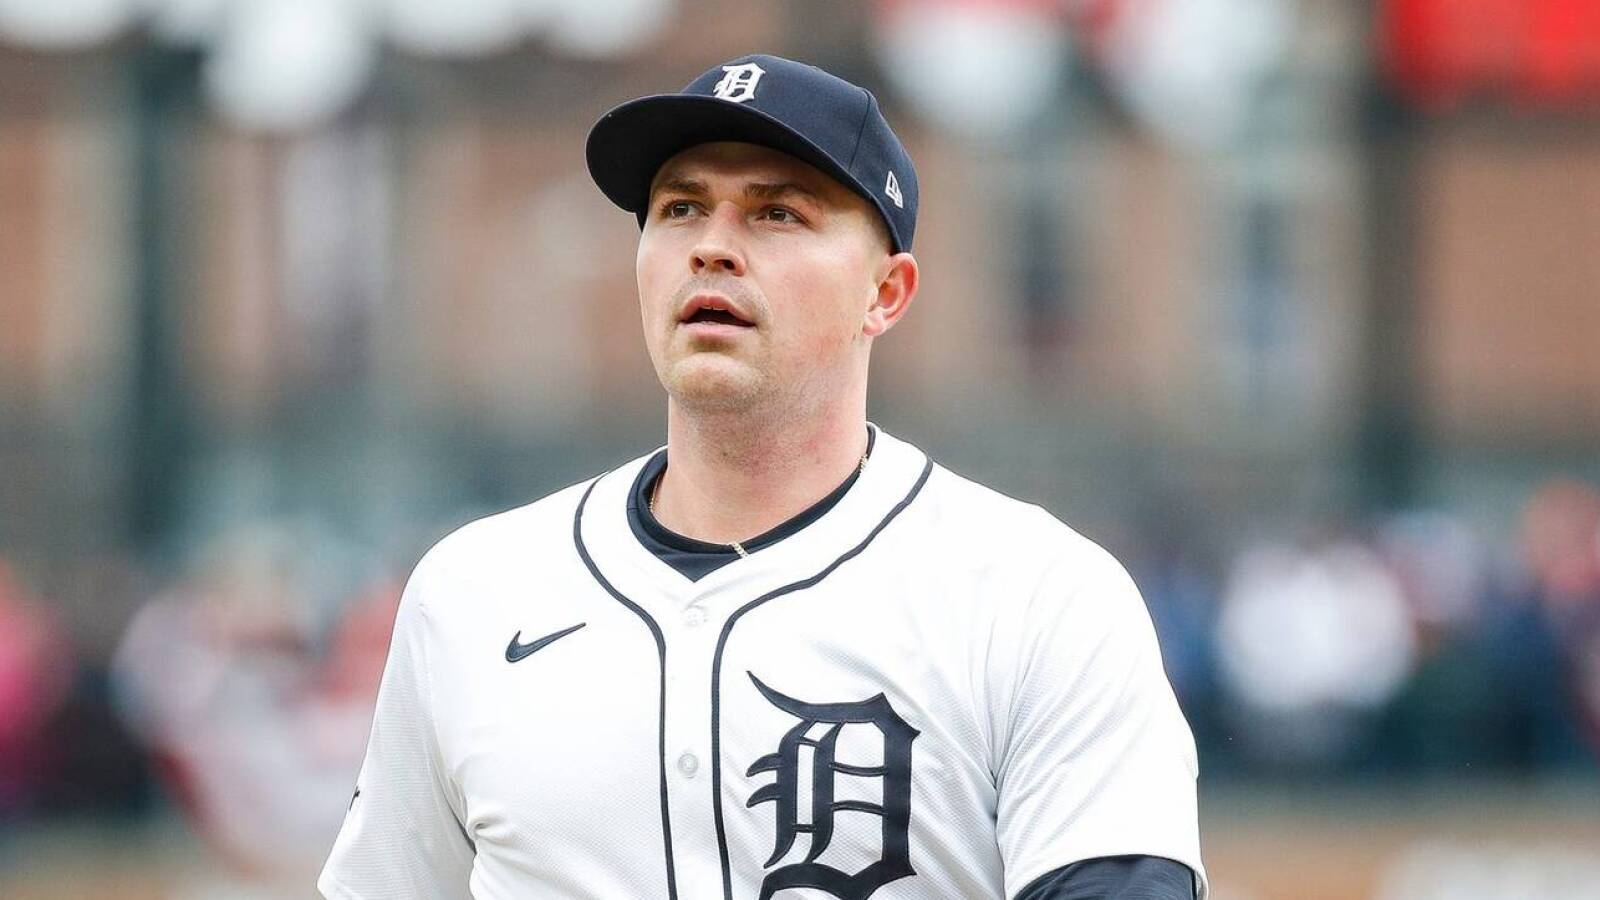 Tigers ace explains why he wanted catcher to let foul ball drop during teammate's gem